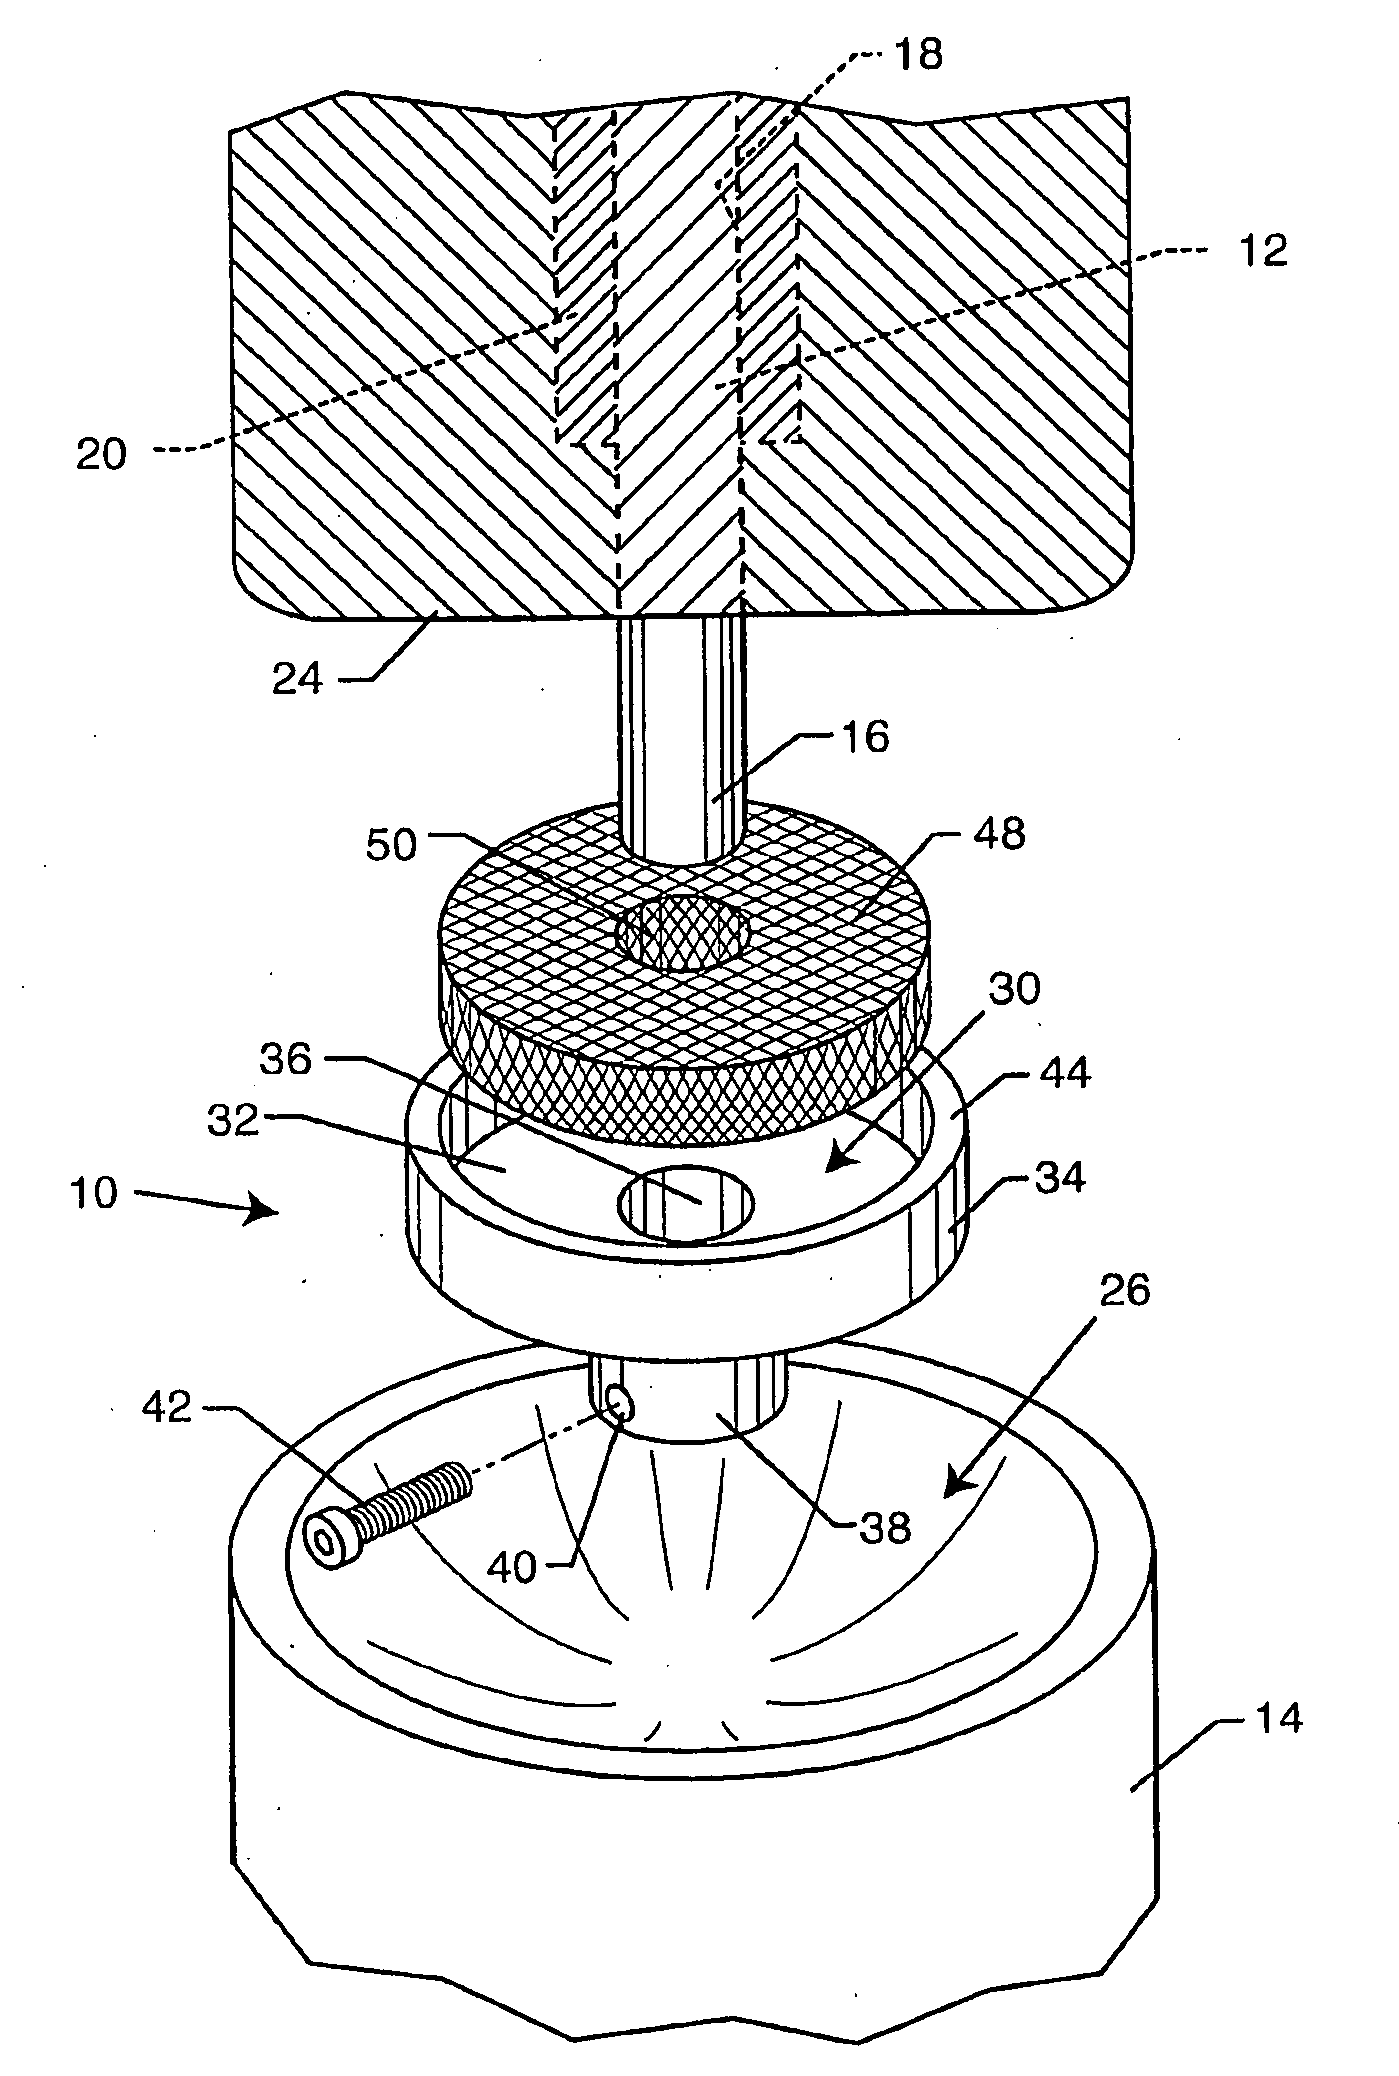 Antimicrobial Containment Cap For a Bone Anchored Prosthesis Mounting